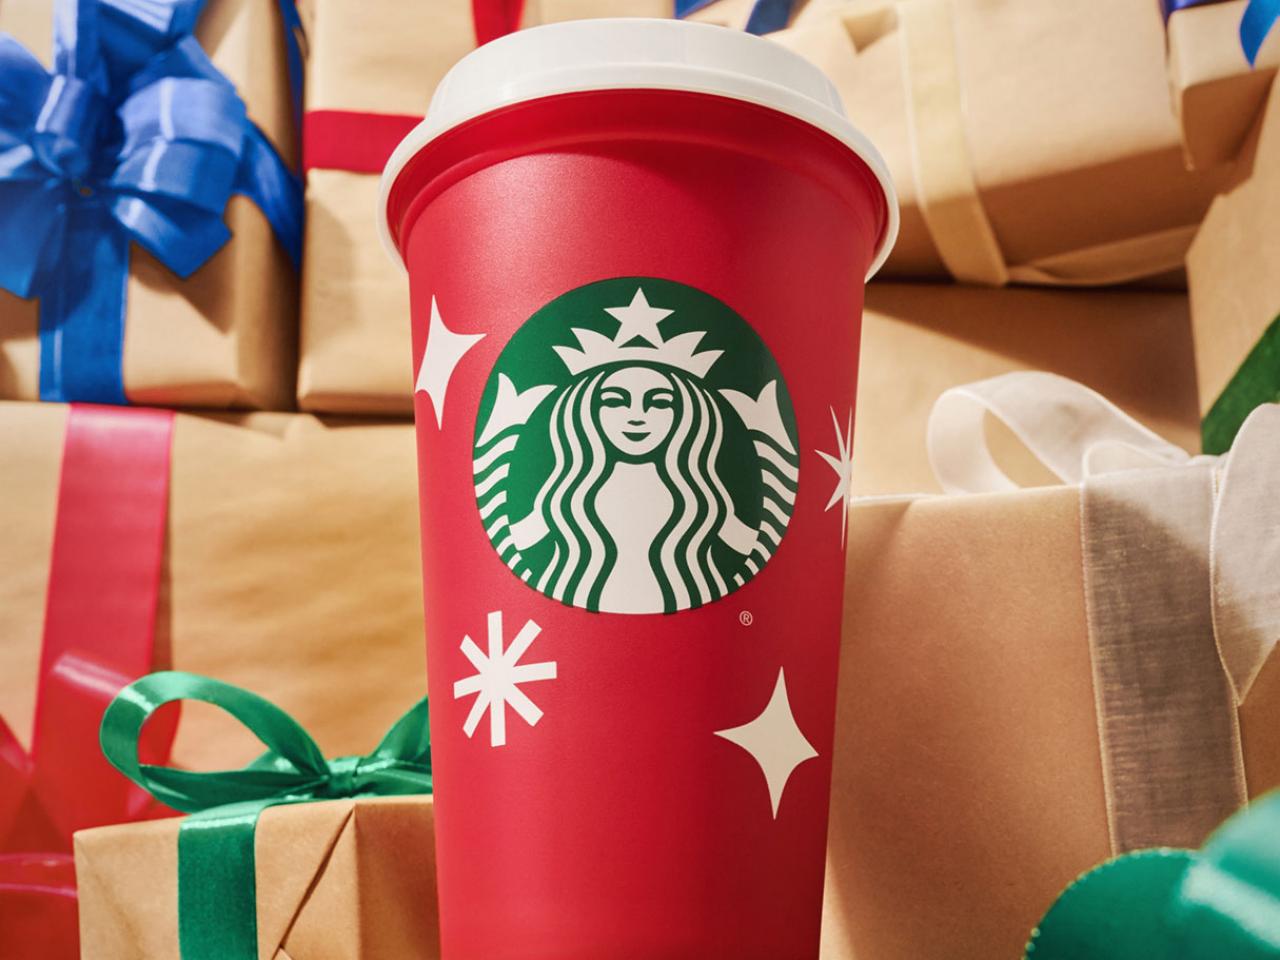 Starbucks Red Cup Day 2023: Here's how to get a free reusable cup